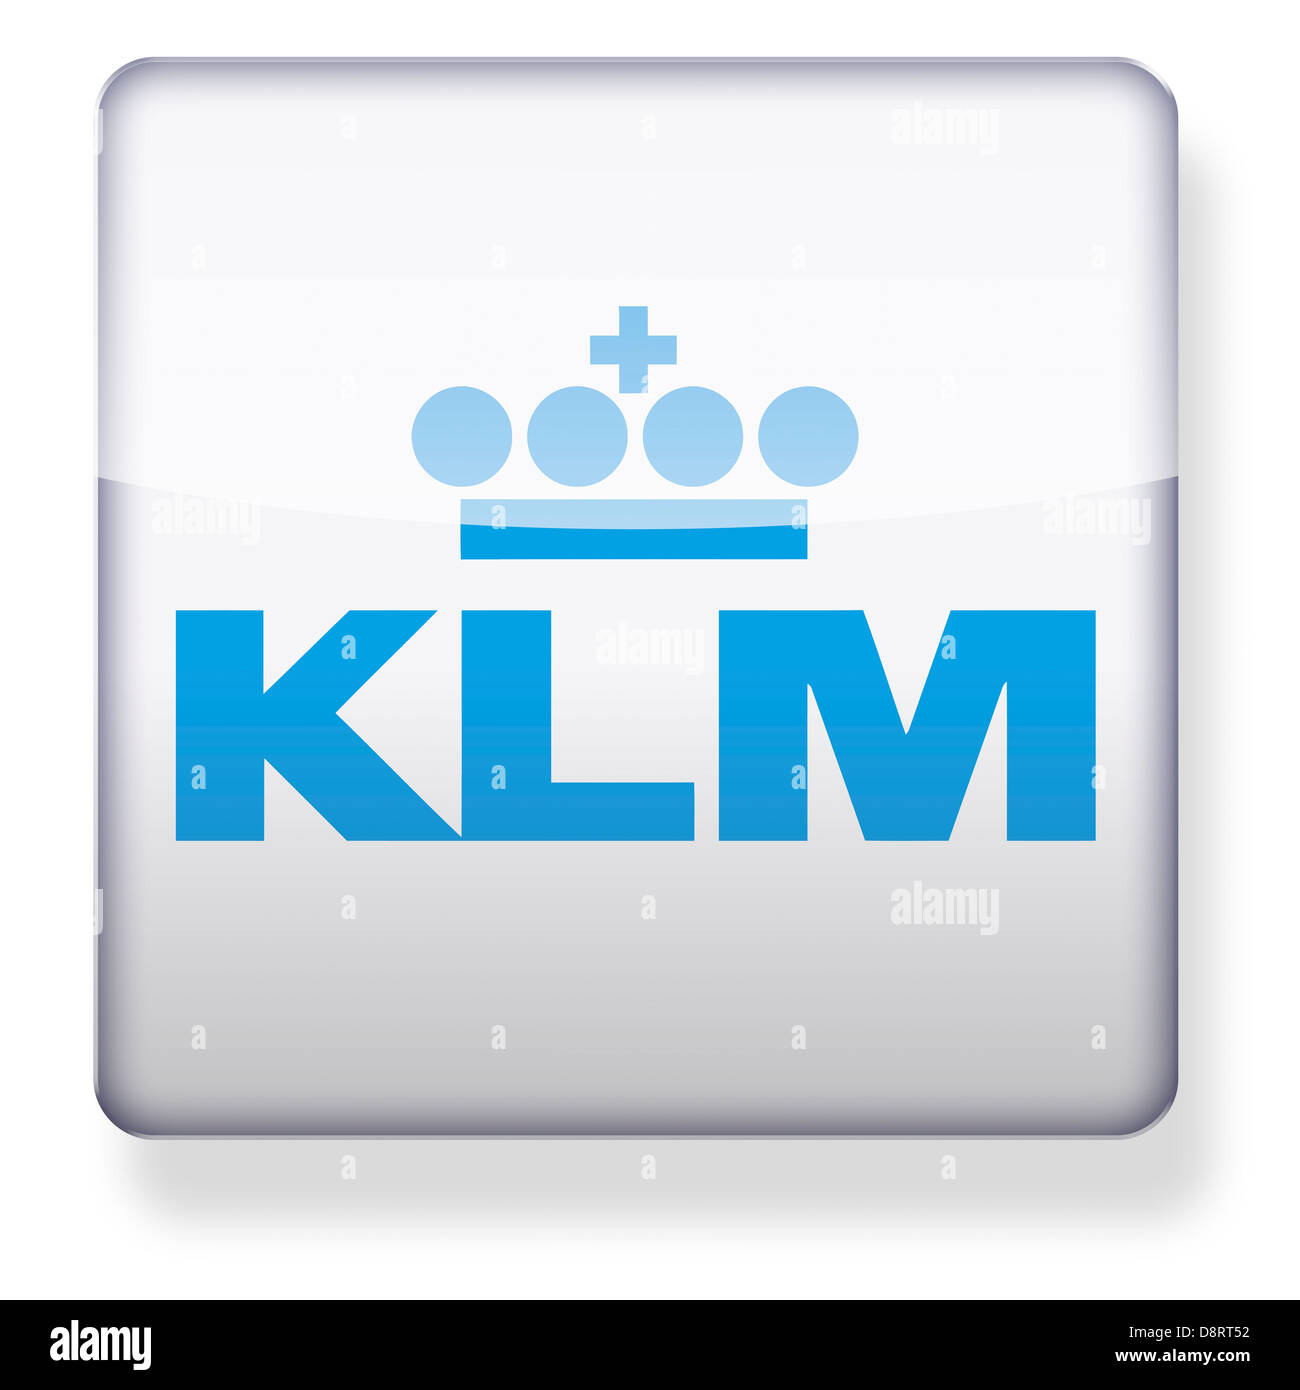 KLM Royal Dutch Airlines logo as an app icon. Clipping path included. Stock Photo